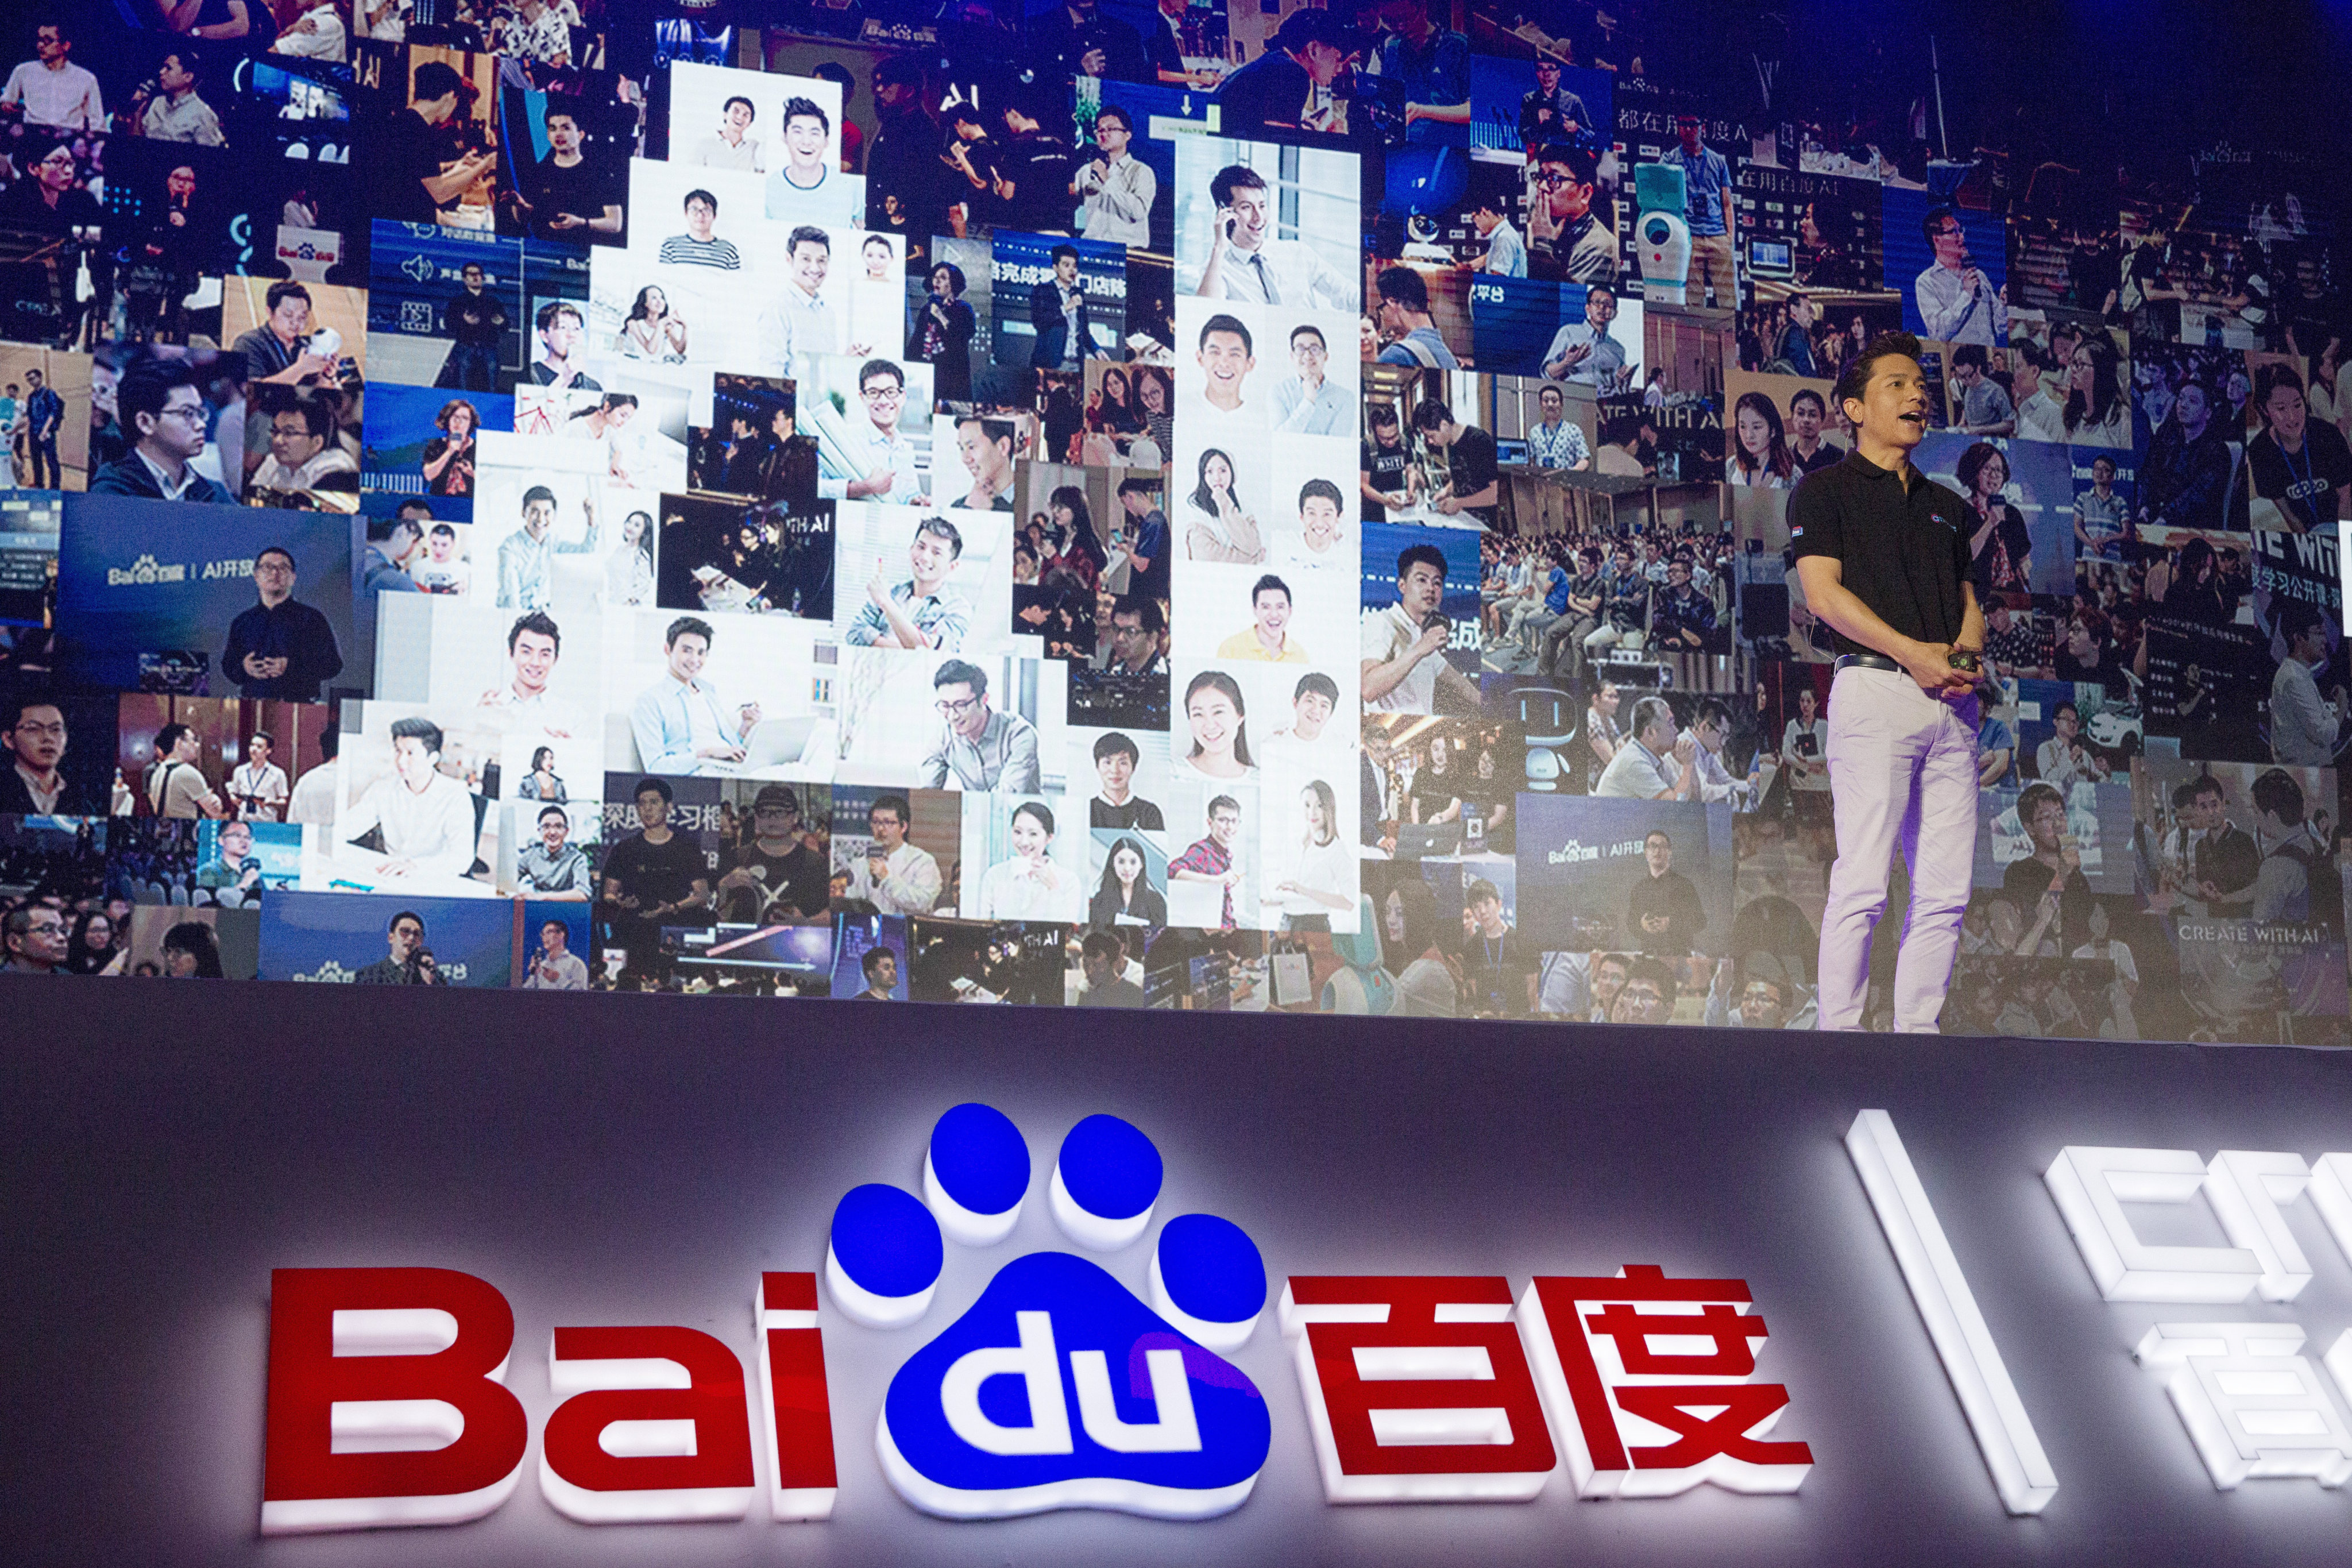 Robin Li, CEO of search giant Baidu, speaks at an event in Beijing in July 2018. Photo: AP Photo